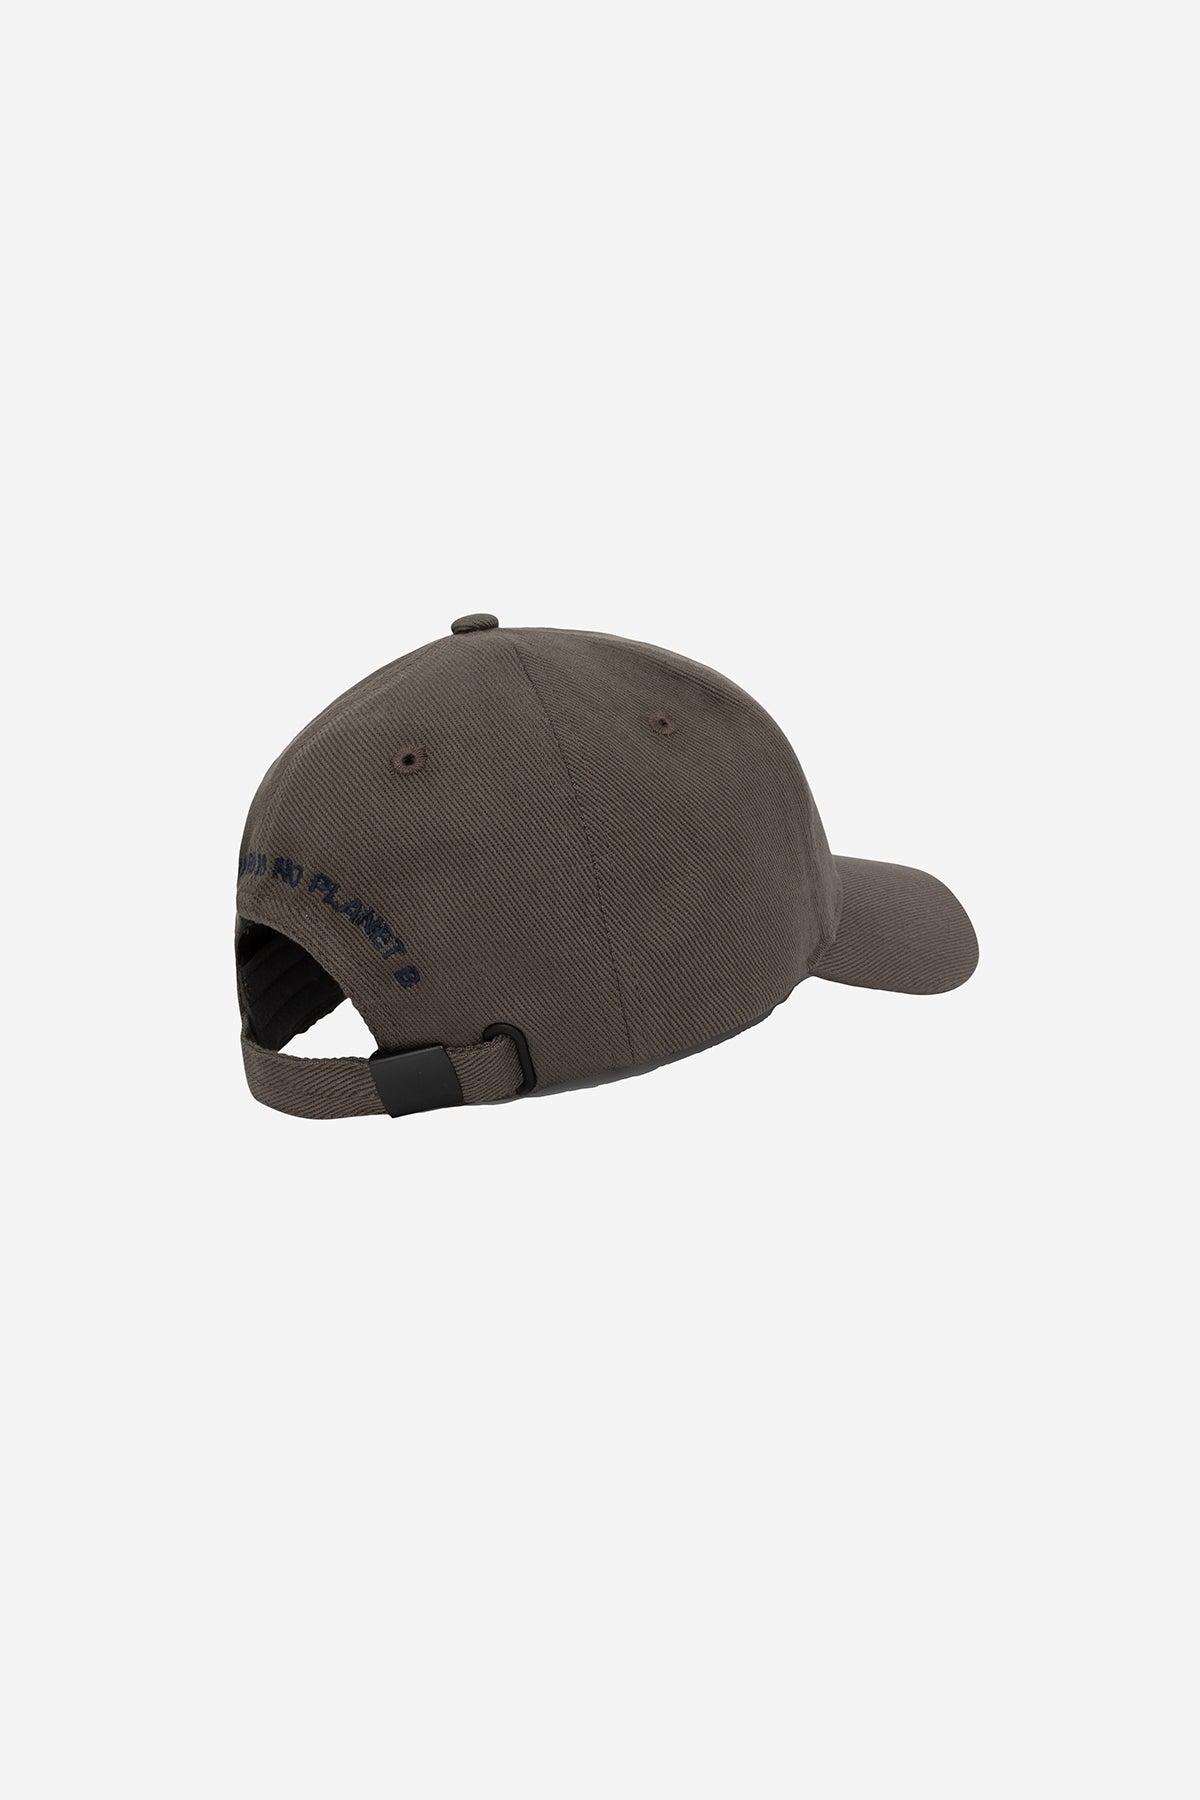 BROWN EMBROIDERED CAP 